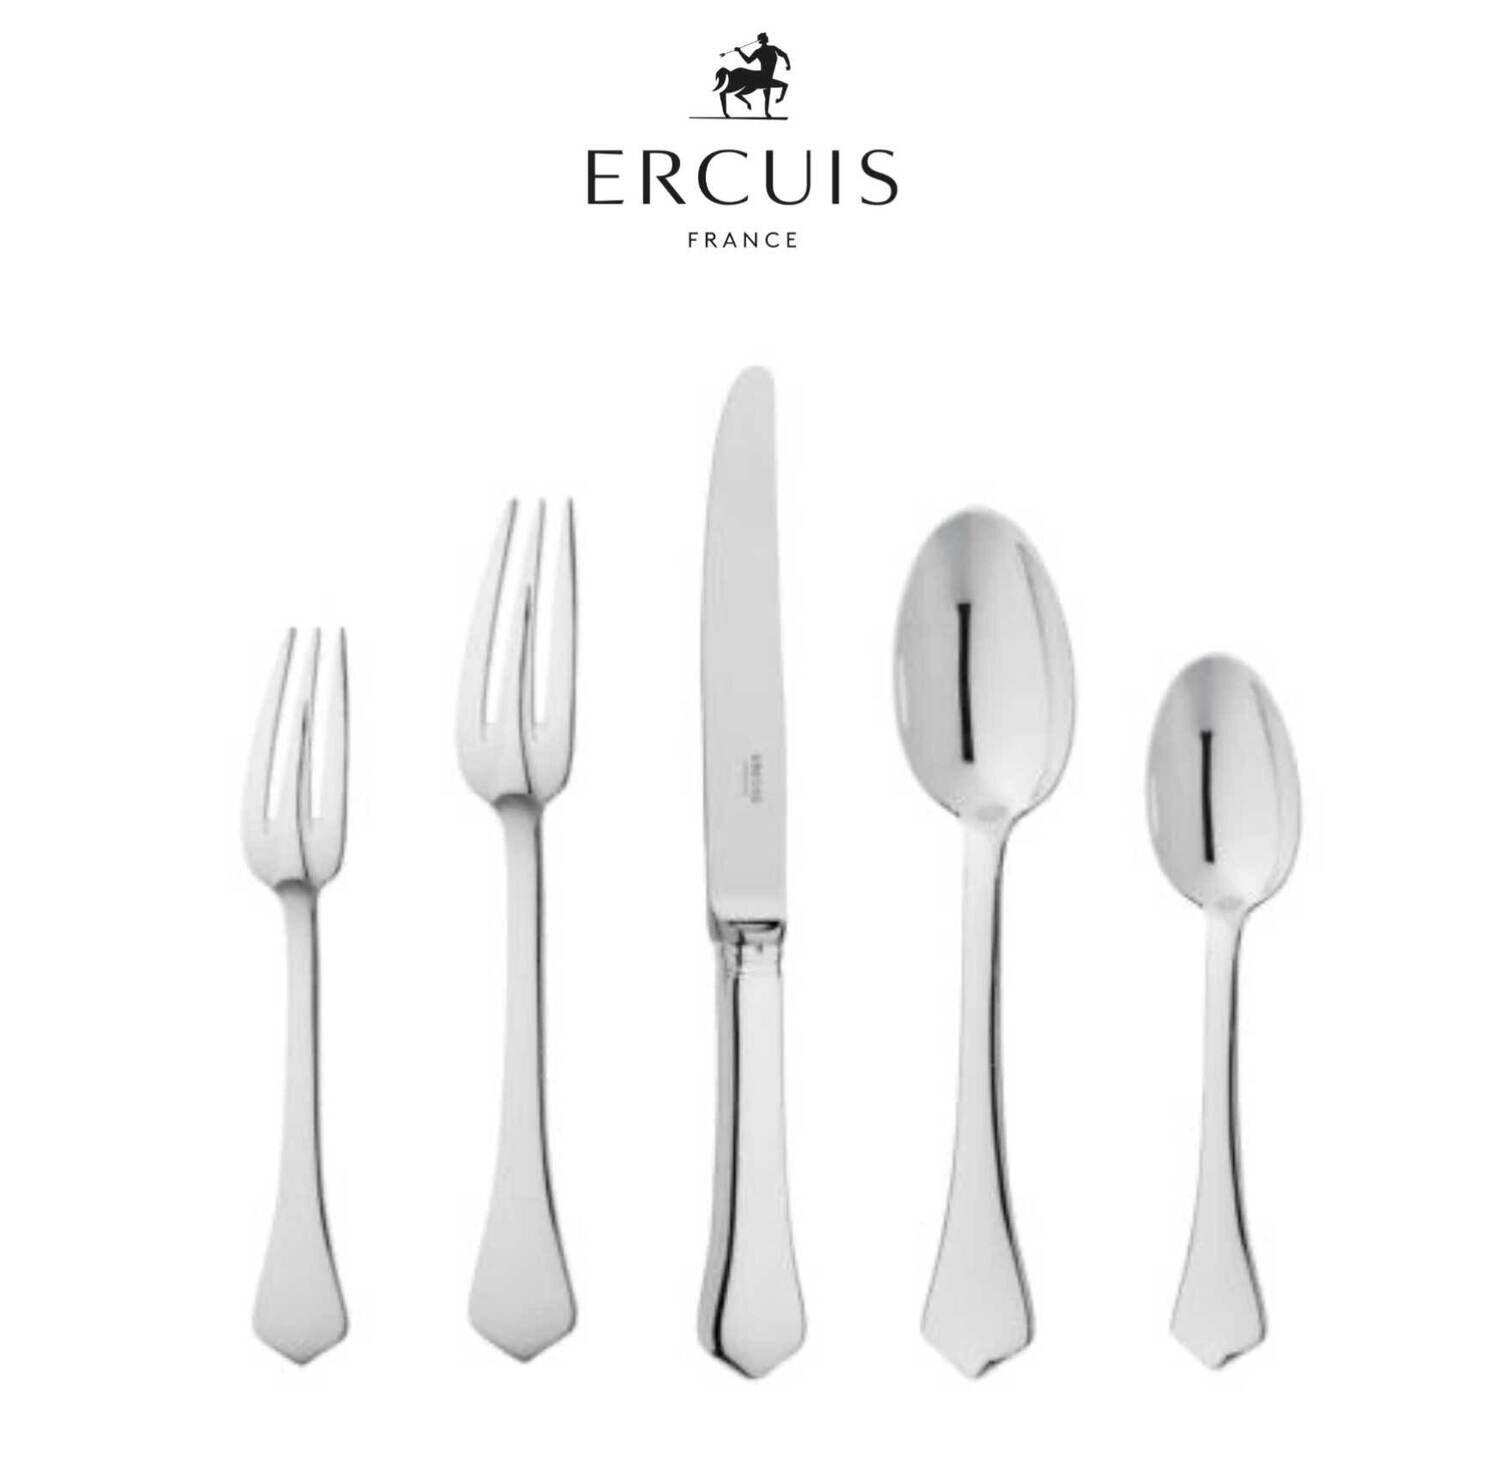 Ercuis Brantome Individual Butter Knife S.H. 6.75 Inch Stainless Steel Silver plated F665150-73